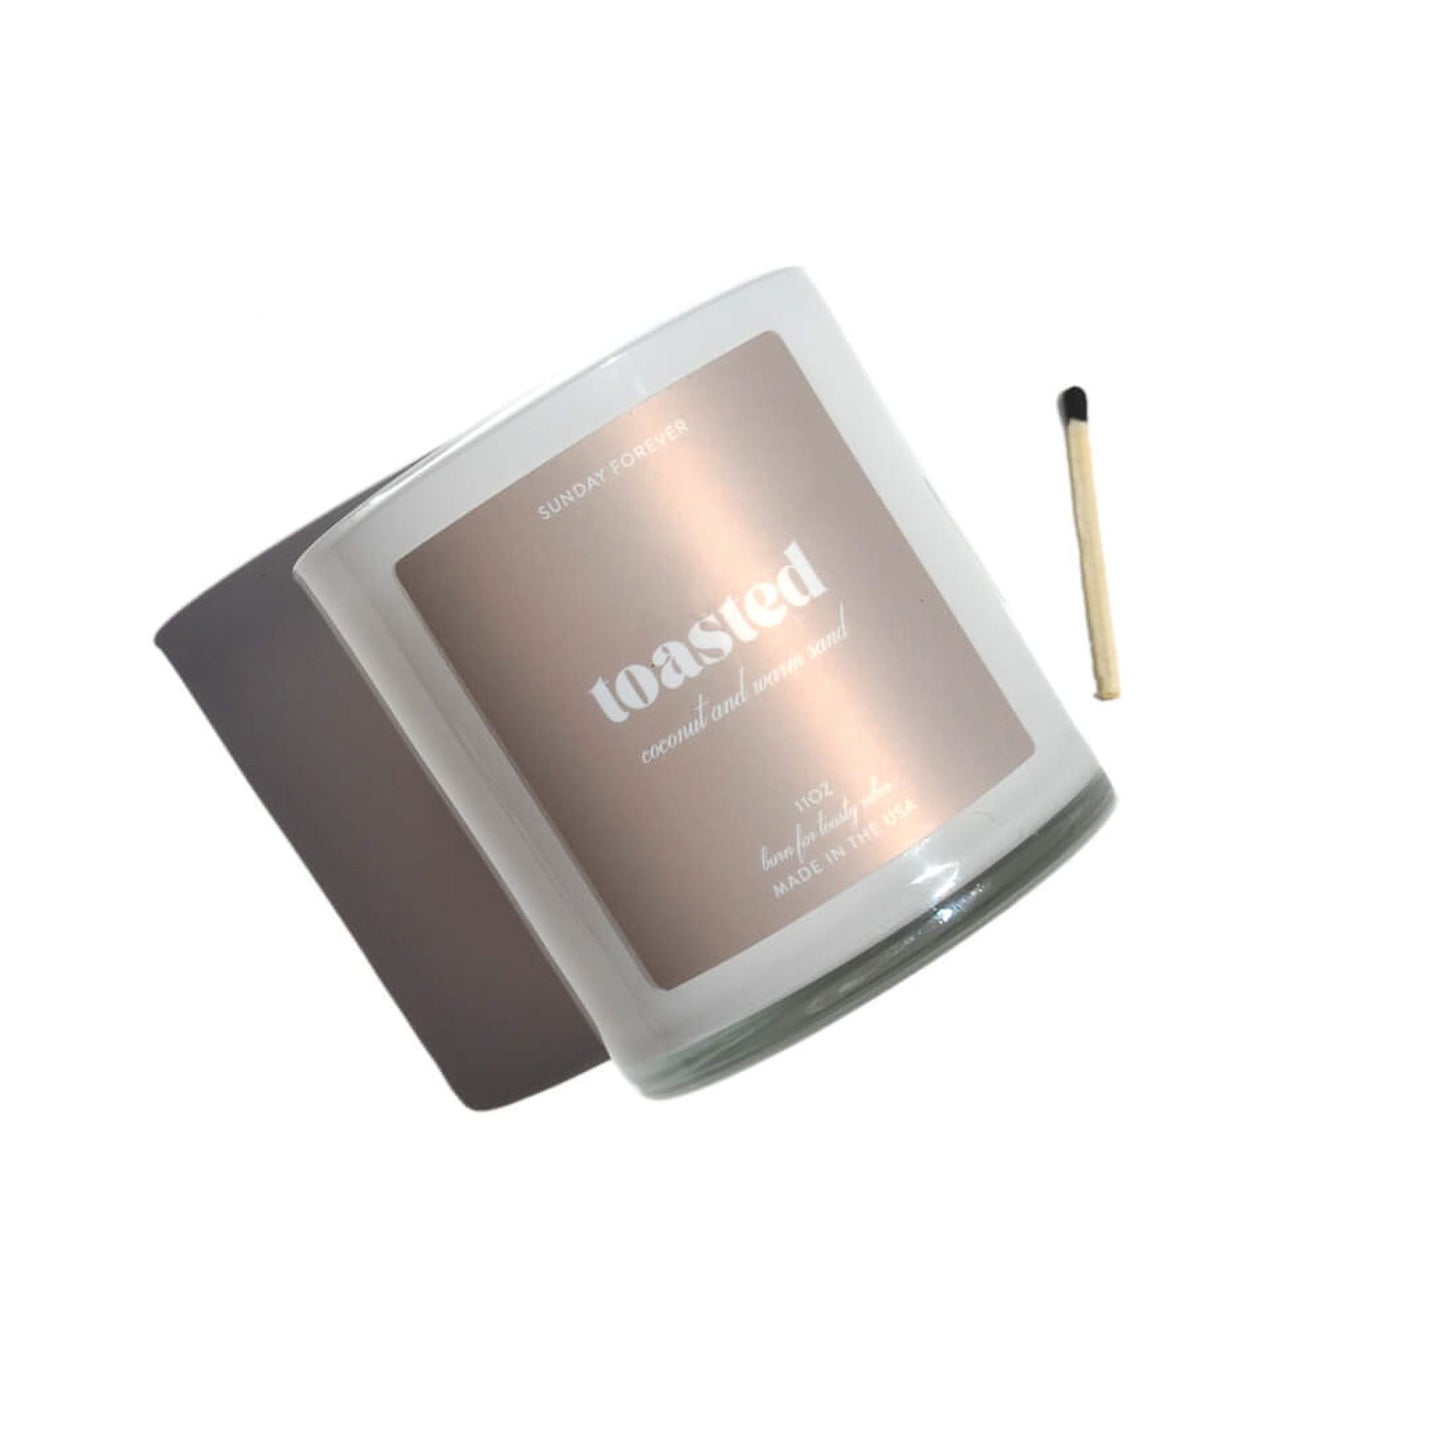 Toasted Luxury Candle (Discontinued Packaging) with Coconut and Warm Sand